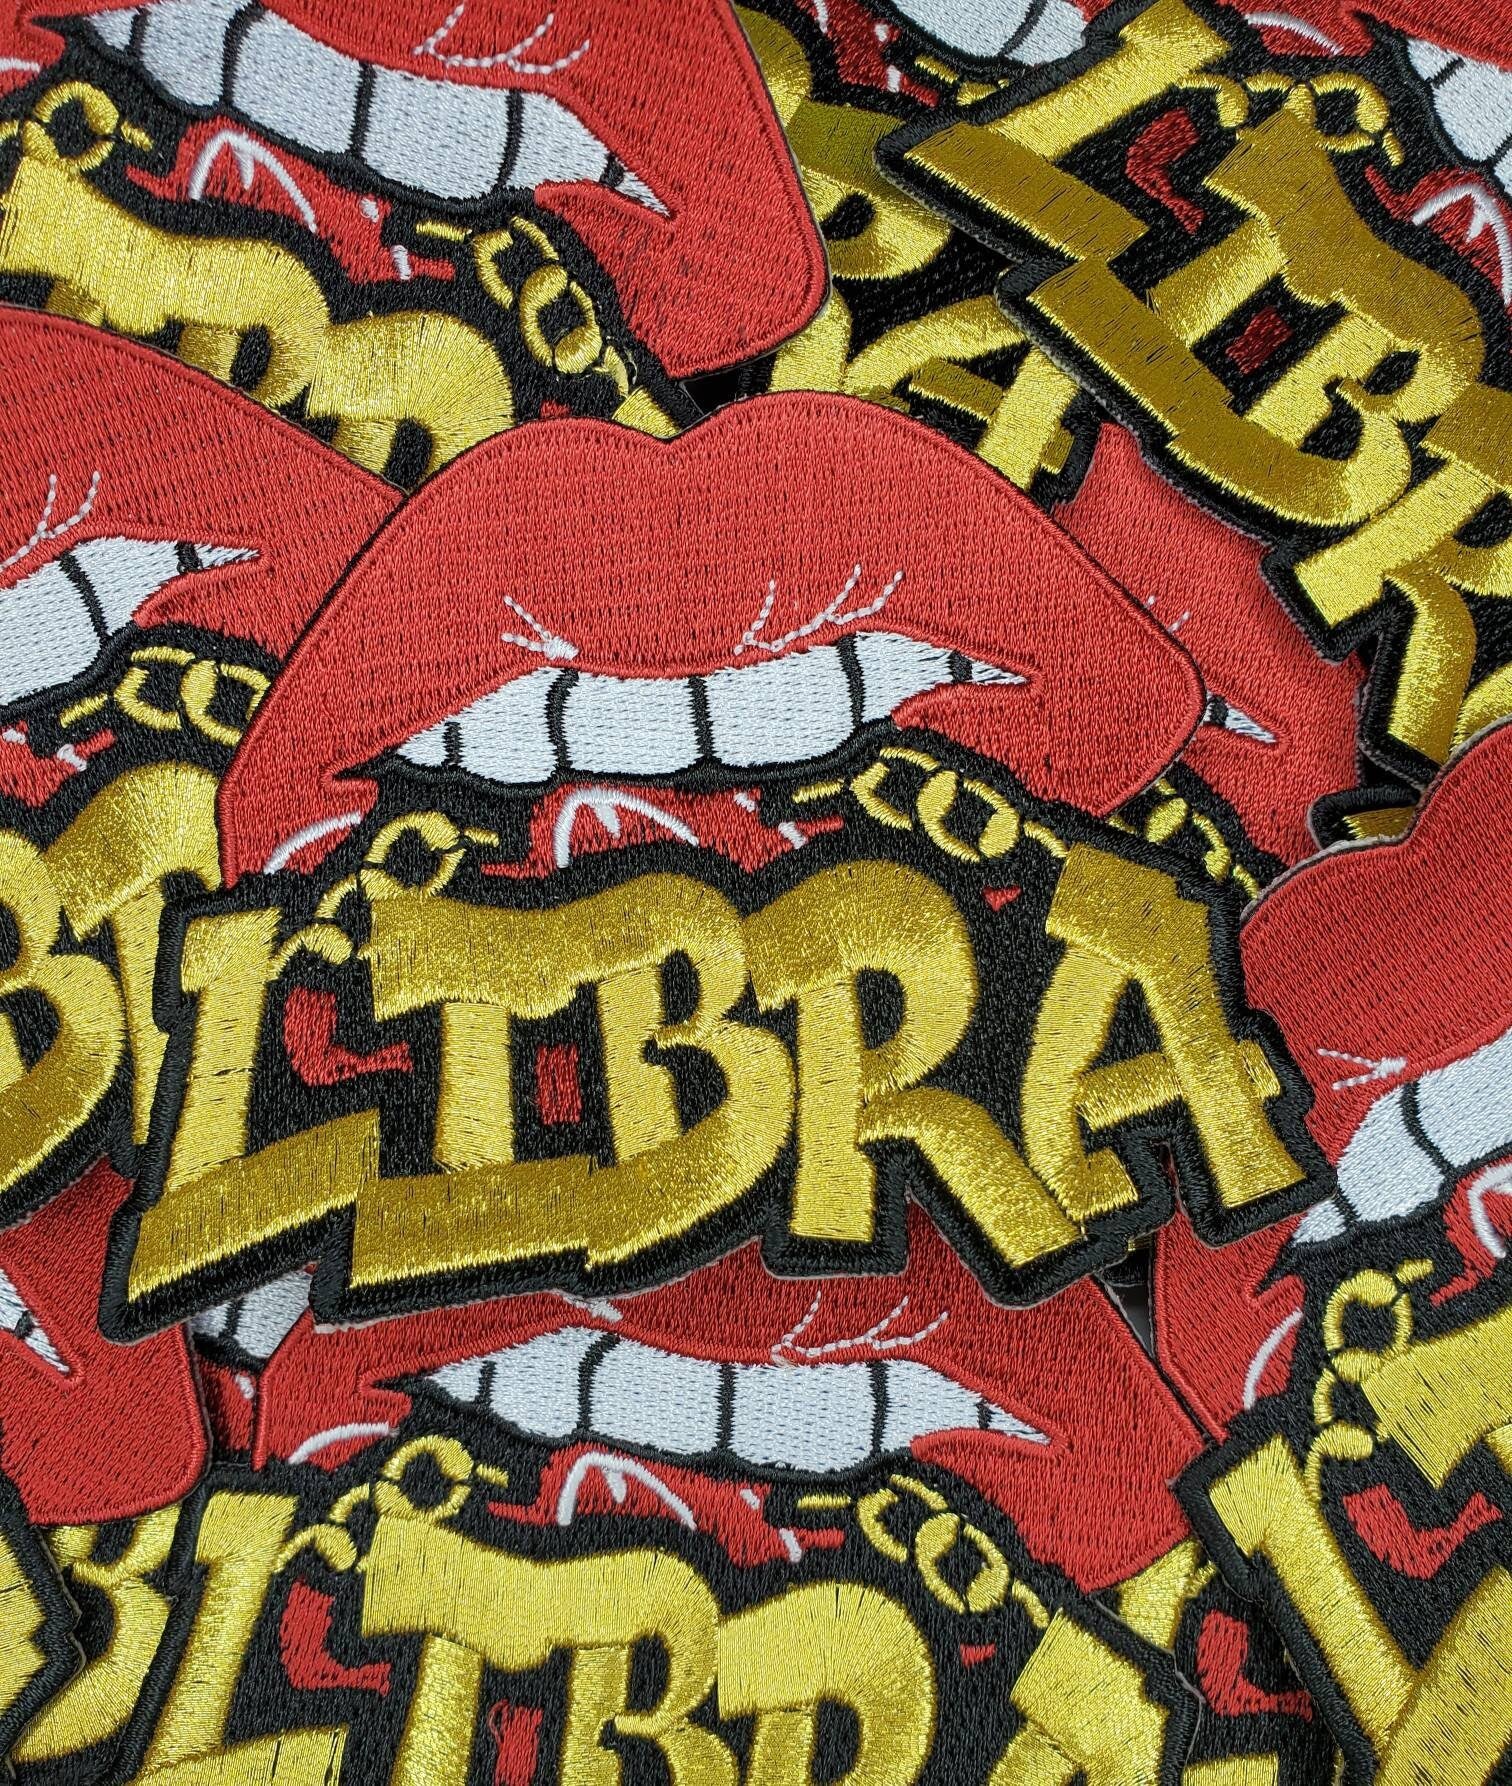 Poppin' Red Lip "Libra" w/Gold Metallic Chain|Iron-On Patch|Astrology Applique|Cool Embroidered Patch|DIY Patch for Denim & Accessories